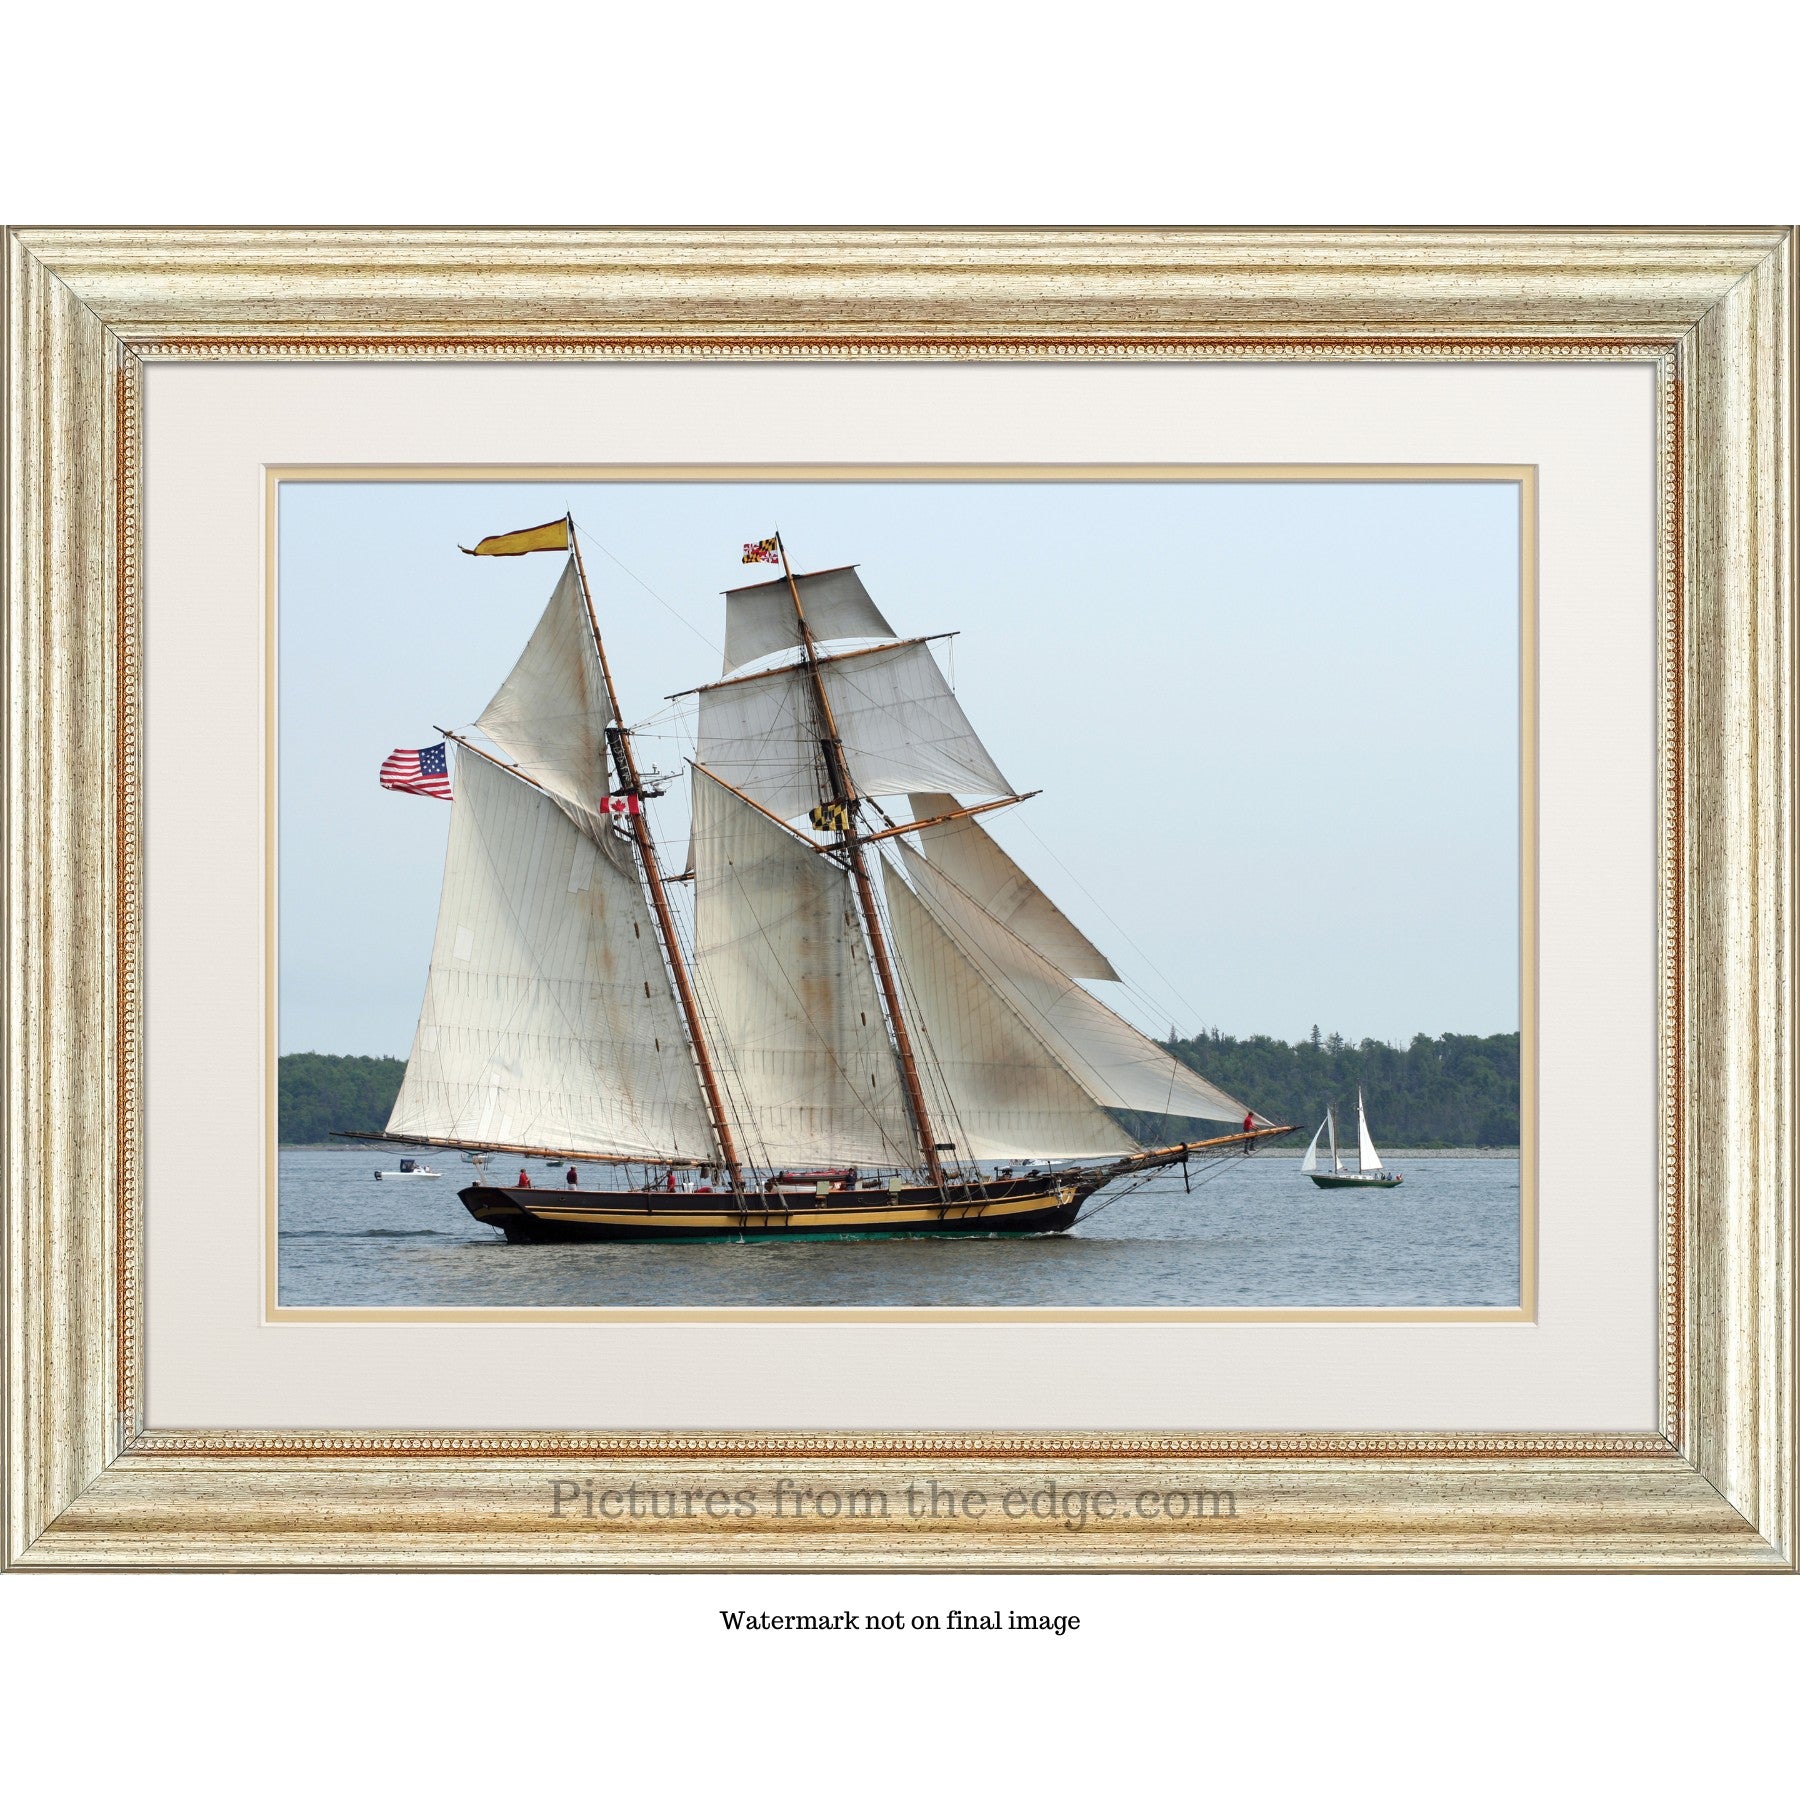 BeMoved by Tallship Sailing Poster. Movable and Removable!